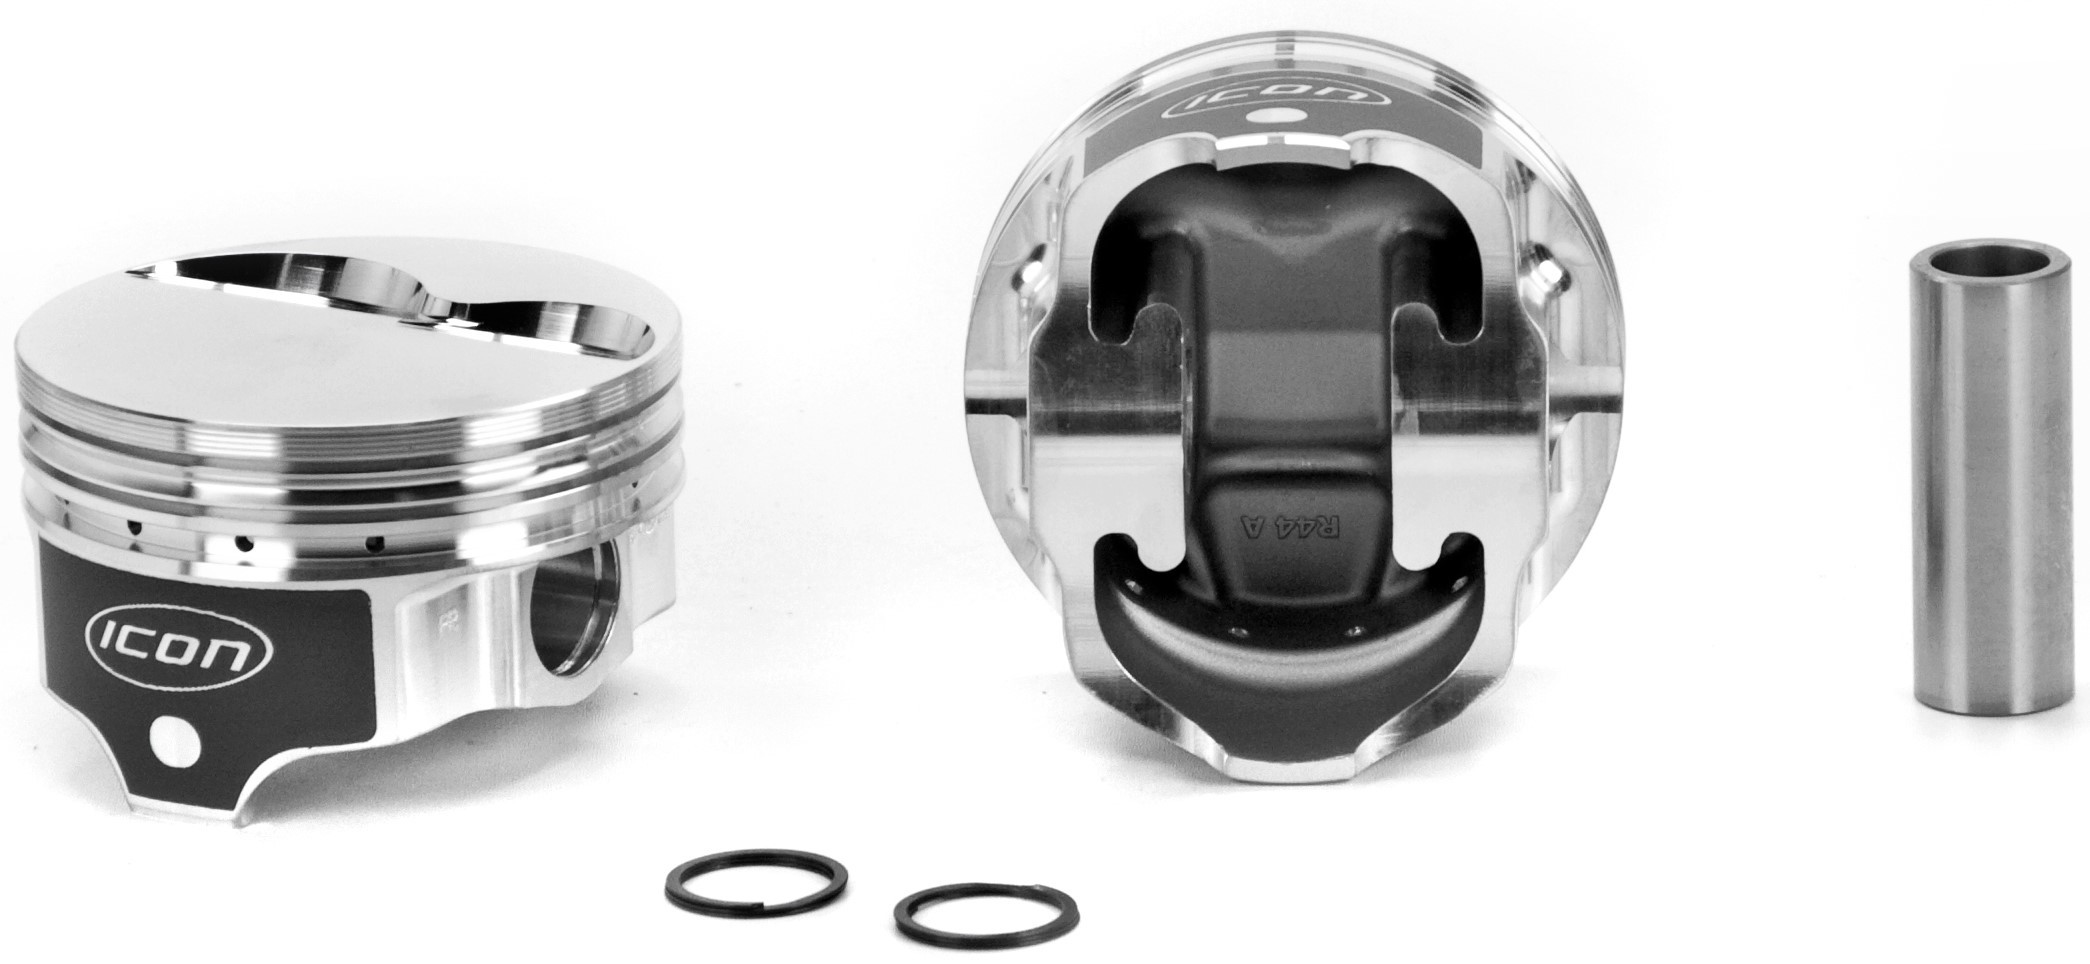 Icon Pistons IC744.030 Piston, Premium Forged, Forged, 4.030 in Bore, 1/16 x 1/16 x 3/16 in Ring Grooves, Plus 5 cc, Small Block Mopar, Set of 8